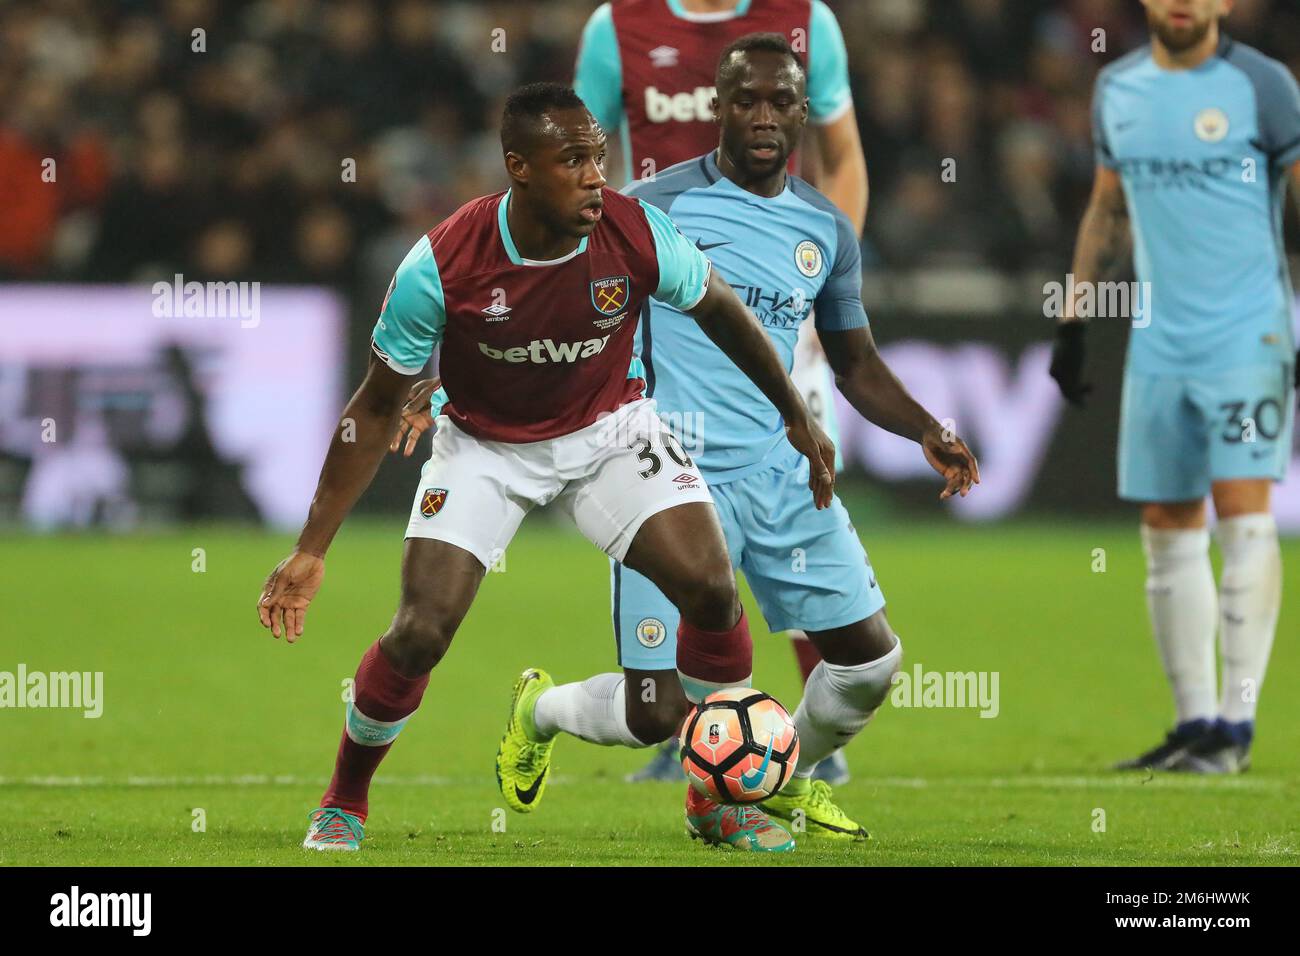 Michail Antonio of West Ham United and Bacary Sagna of Manchester City - West Ham United v Manchester City, FA Cup Third round, The London Stadium, London - 6th January 2017. Stock Photo